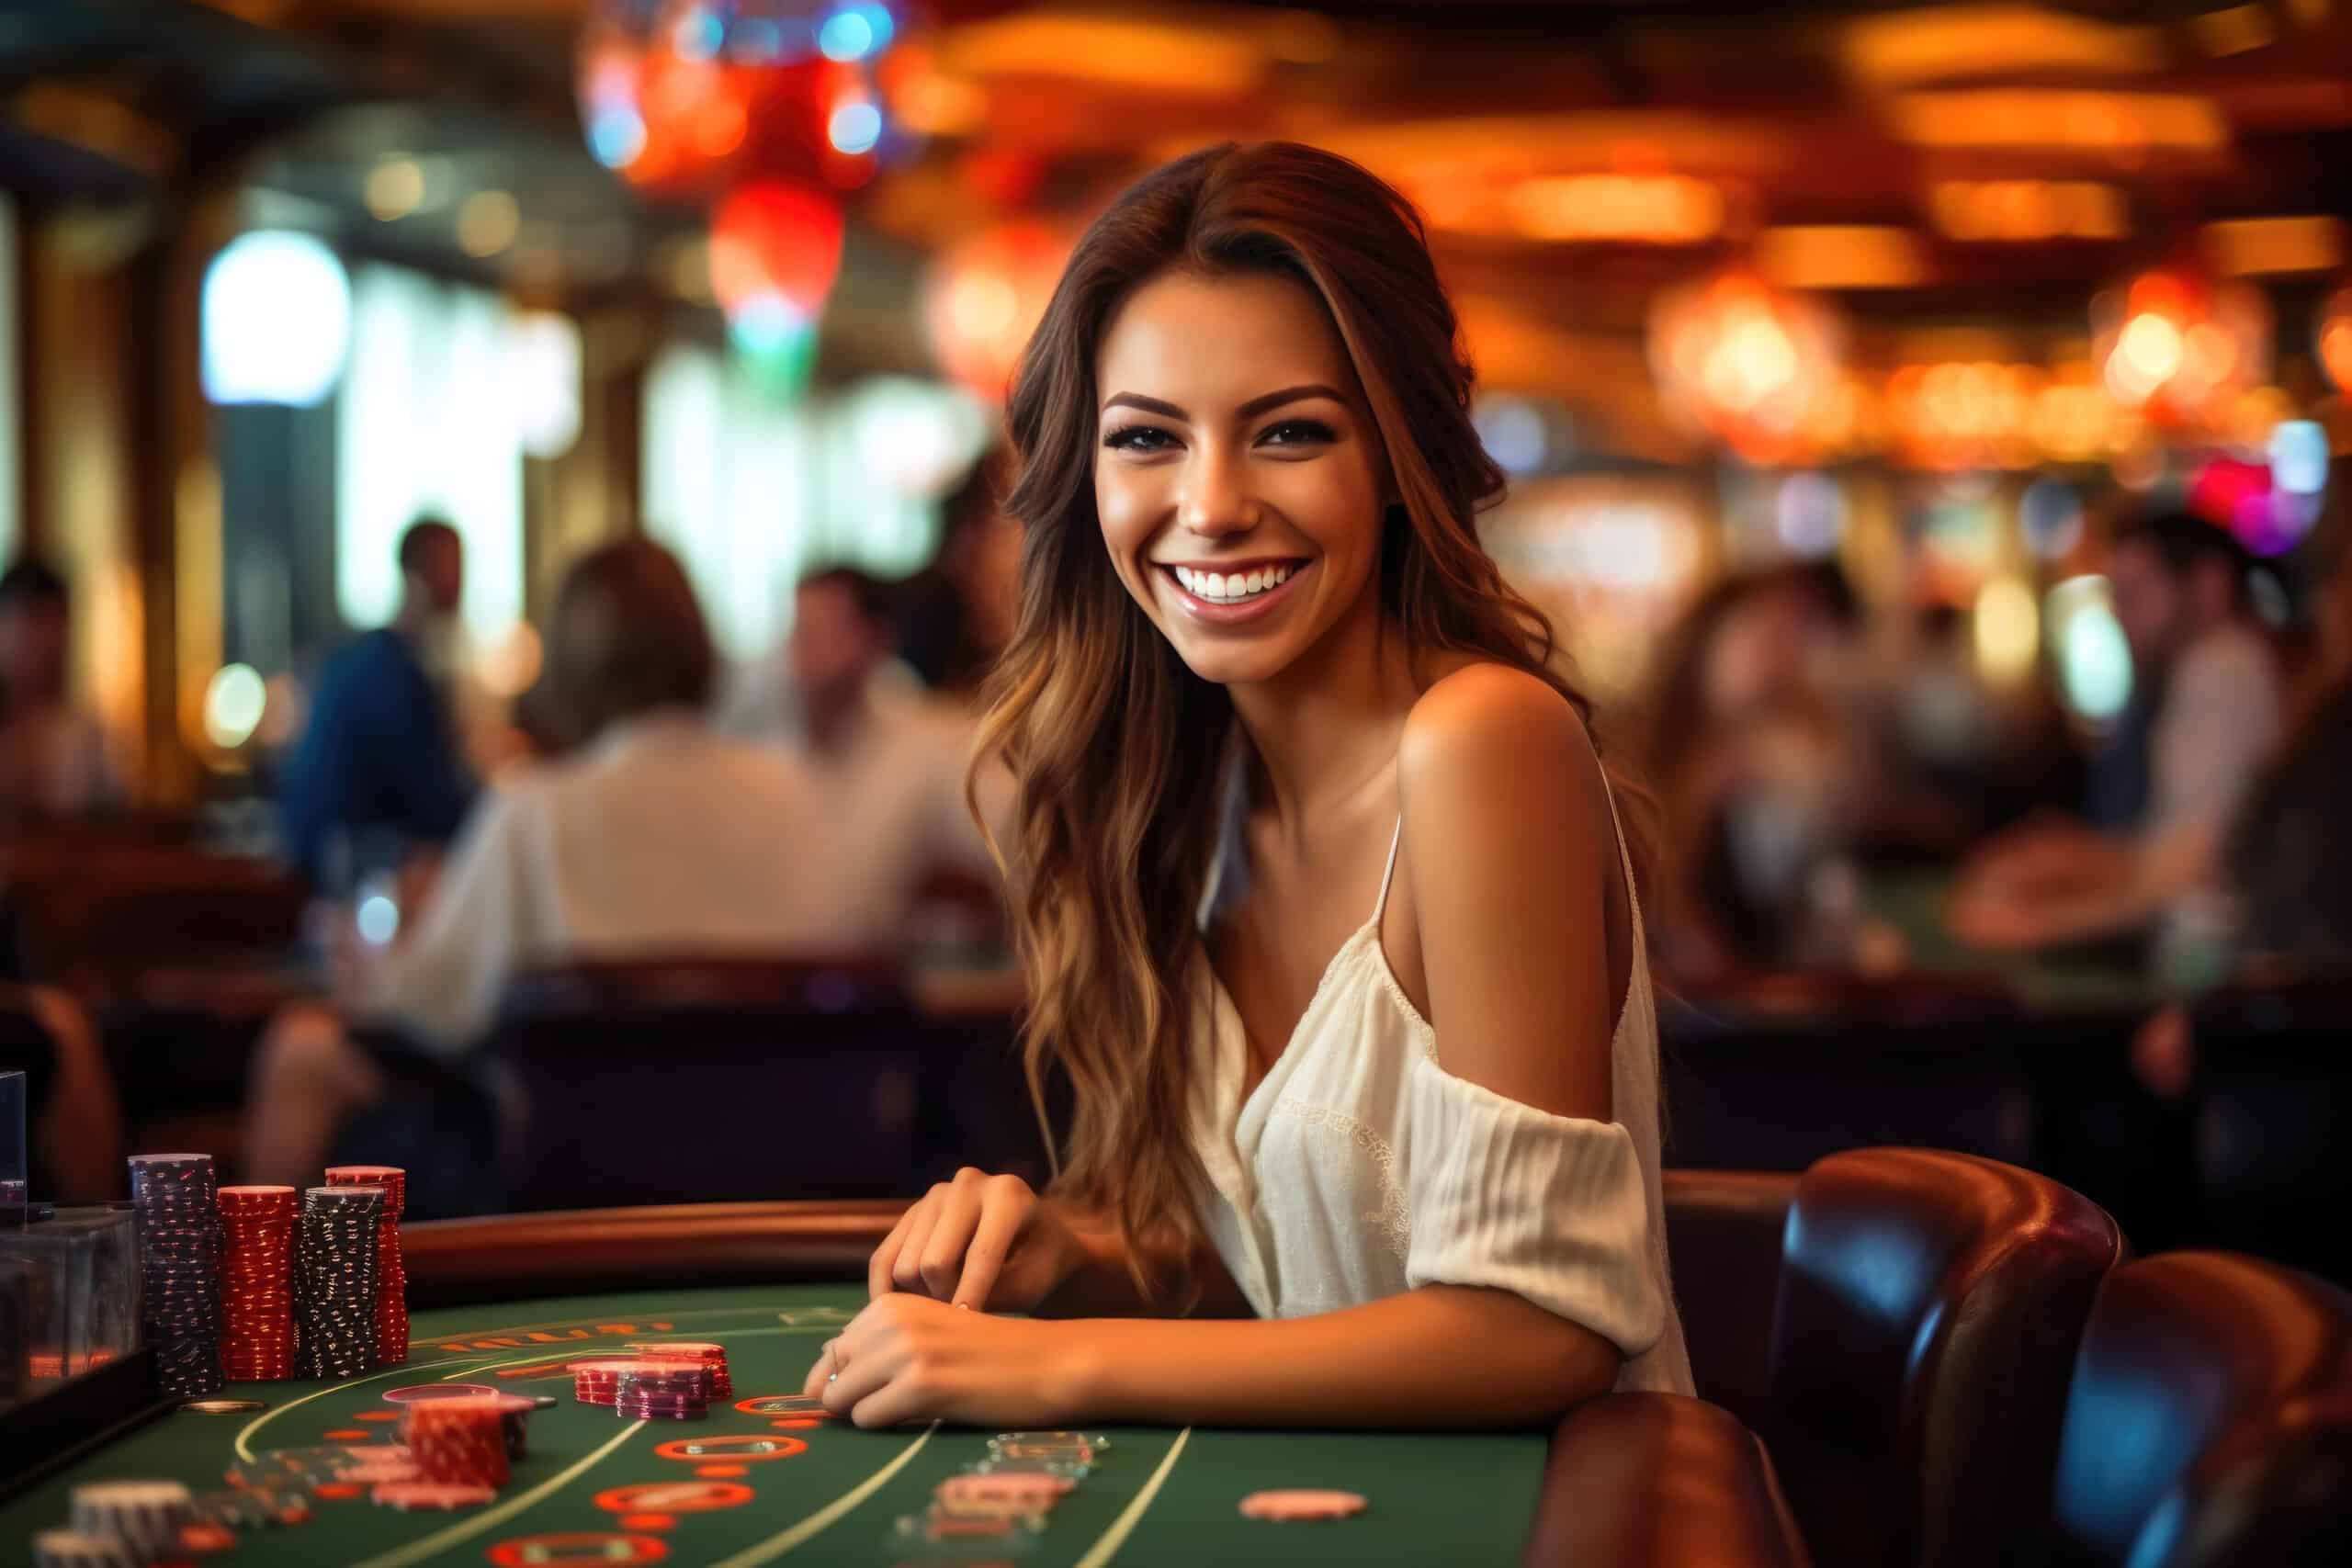 Woman Triumphs at Baccarat Table